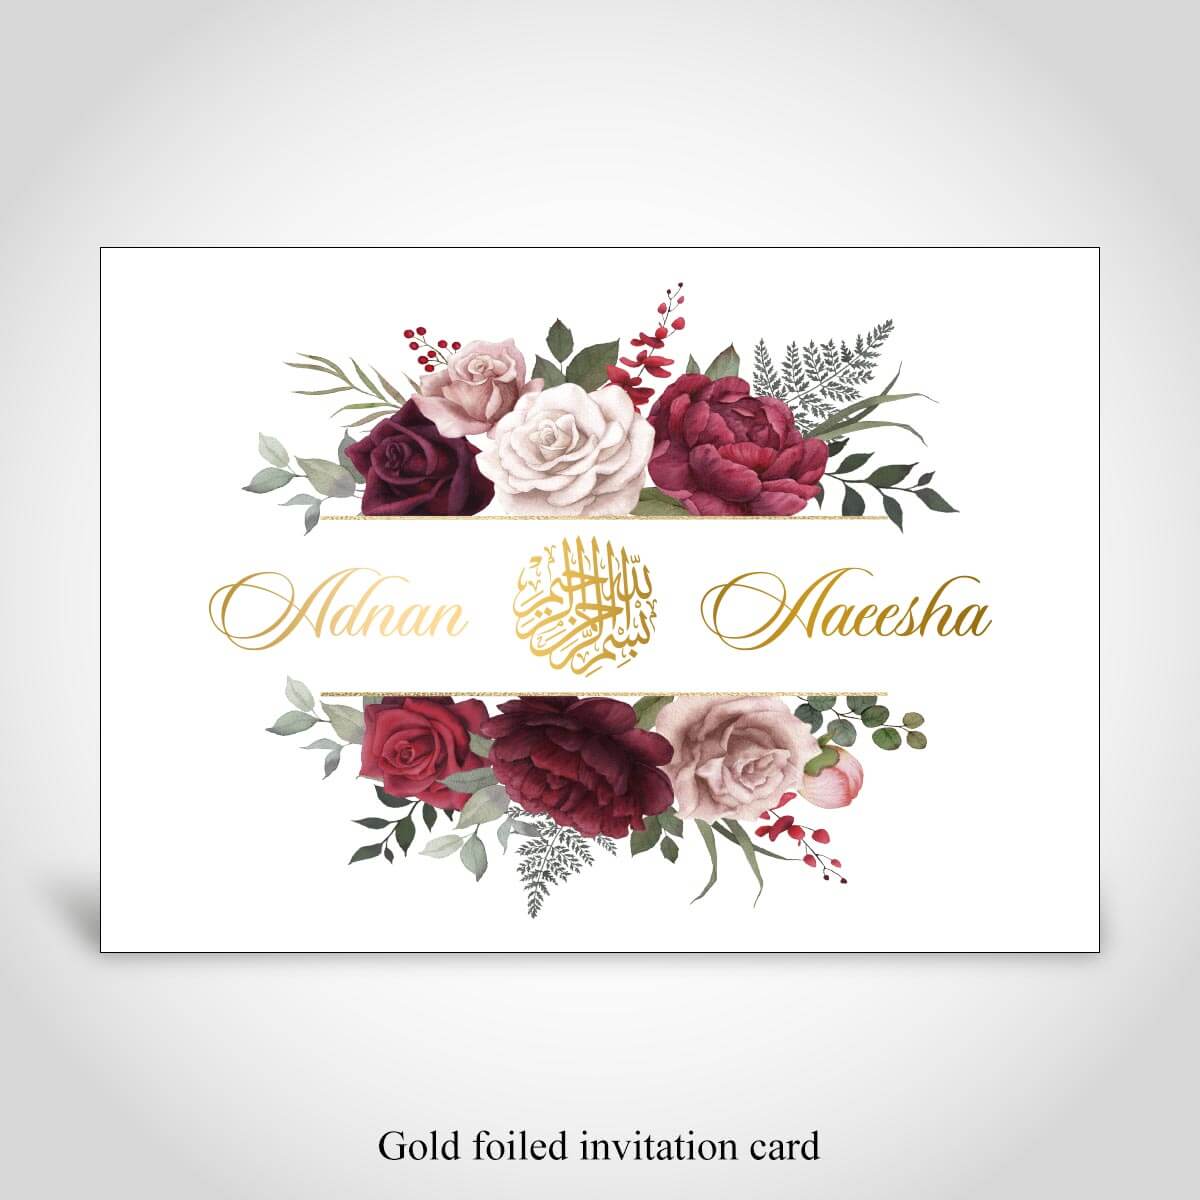 Discover The Beauty of Muslim Wedding Invitations with CardFusion CardFusion